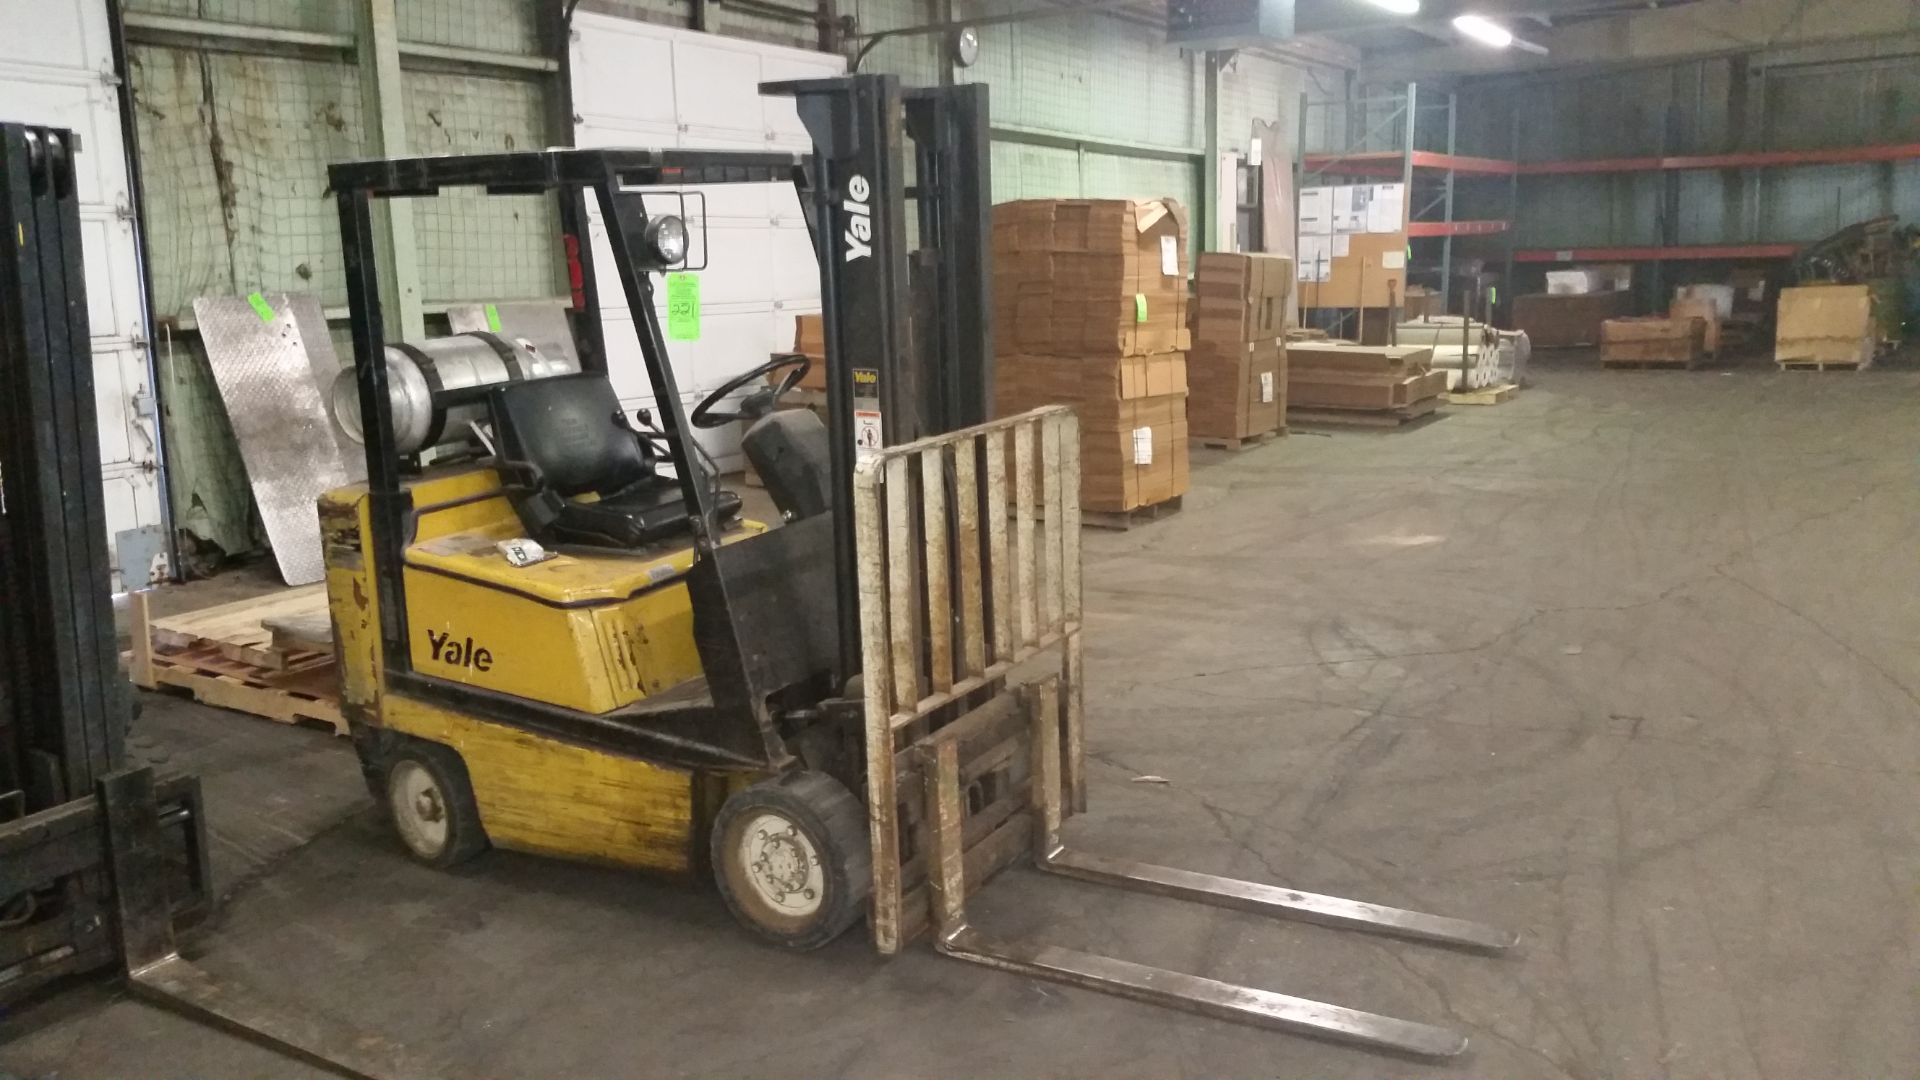 YALE LP FORKLIFT; 2-STAGE MASS; SOLID TIRES; 8366 HRS; M#    GLC040AENVAFO83; S# N549370; 4000LB - Image 2 of 2